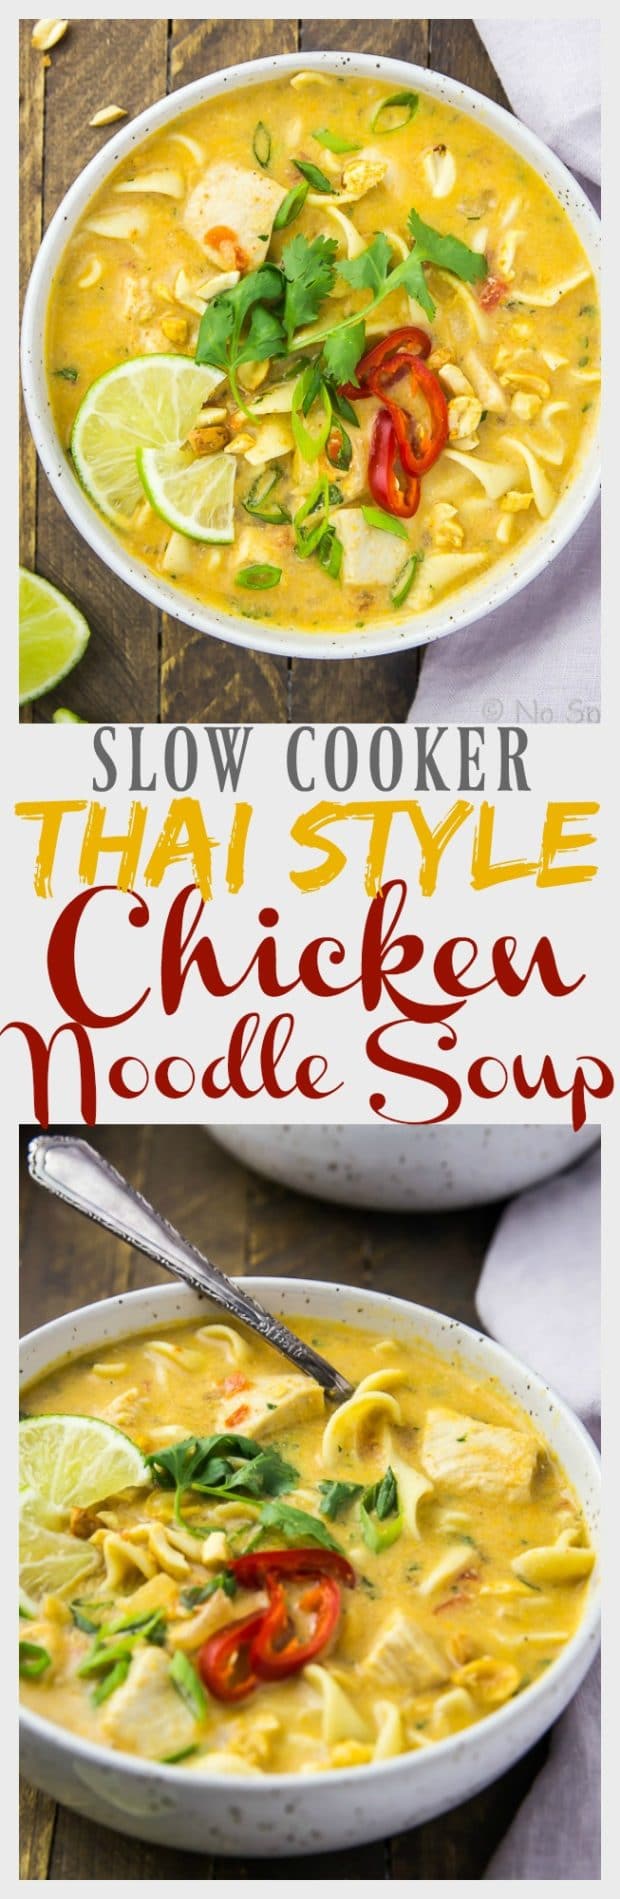 Slow Cooker Thai Style Chicken Noodle Soup